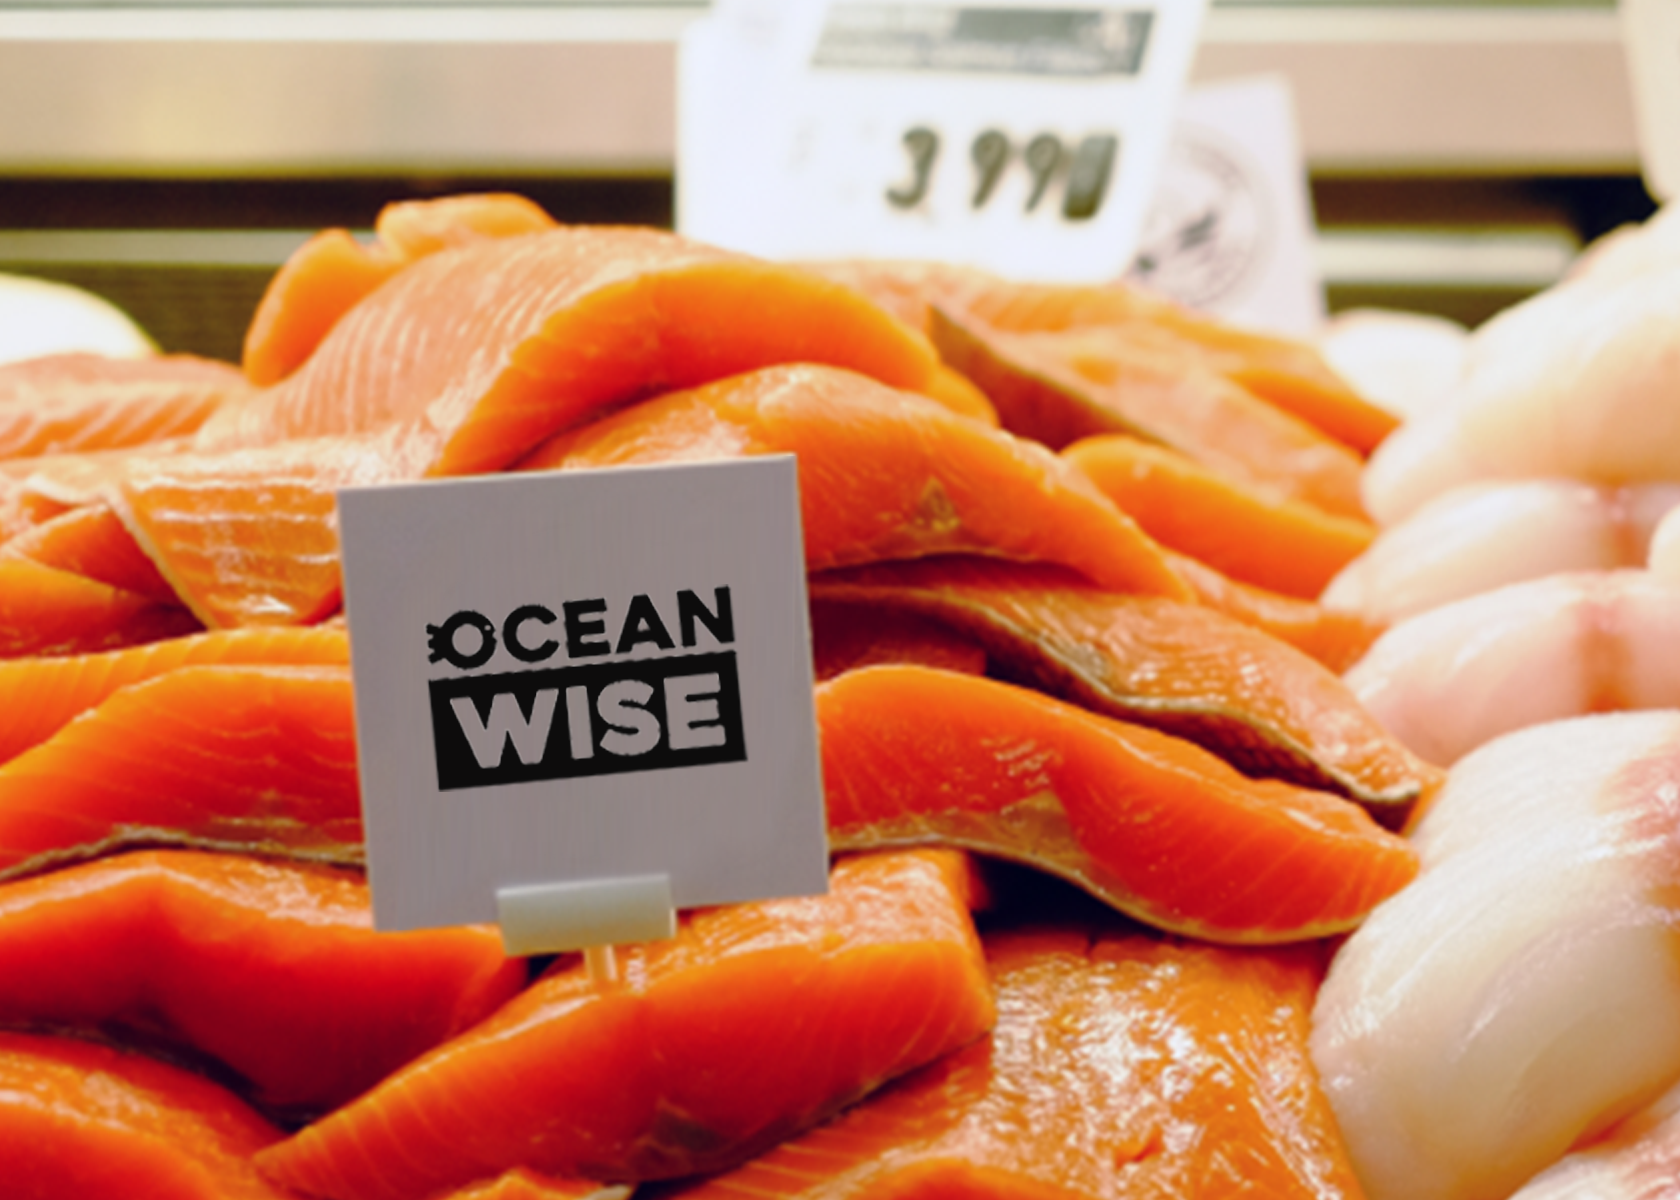 Pieces of salmon for sale in a shop with an Ocean Wise sign